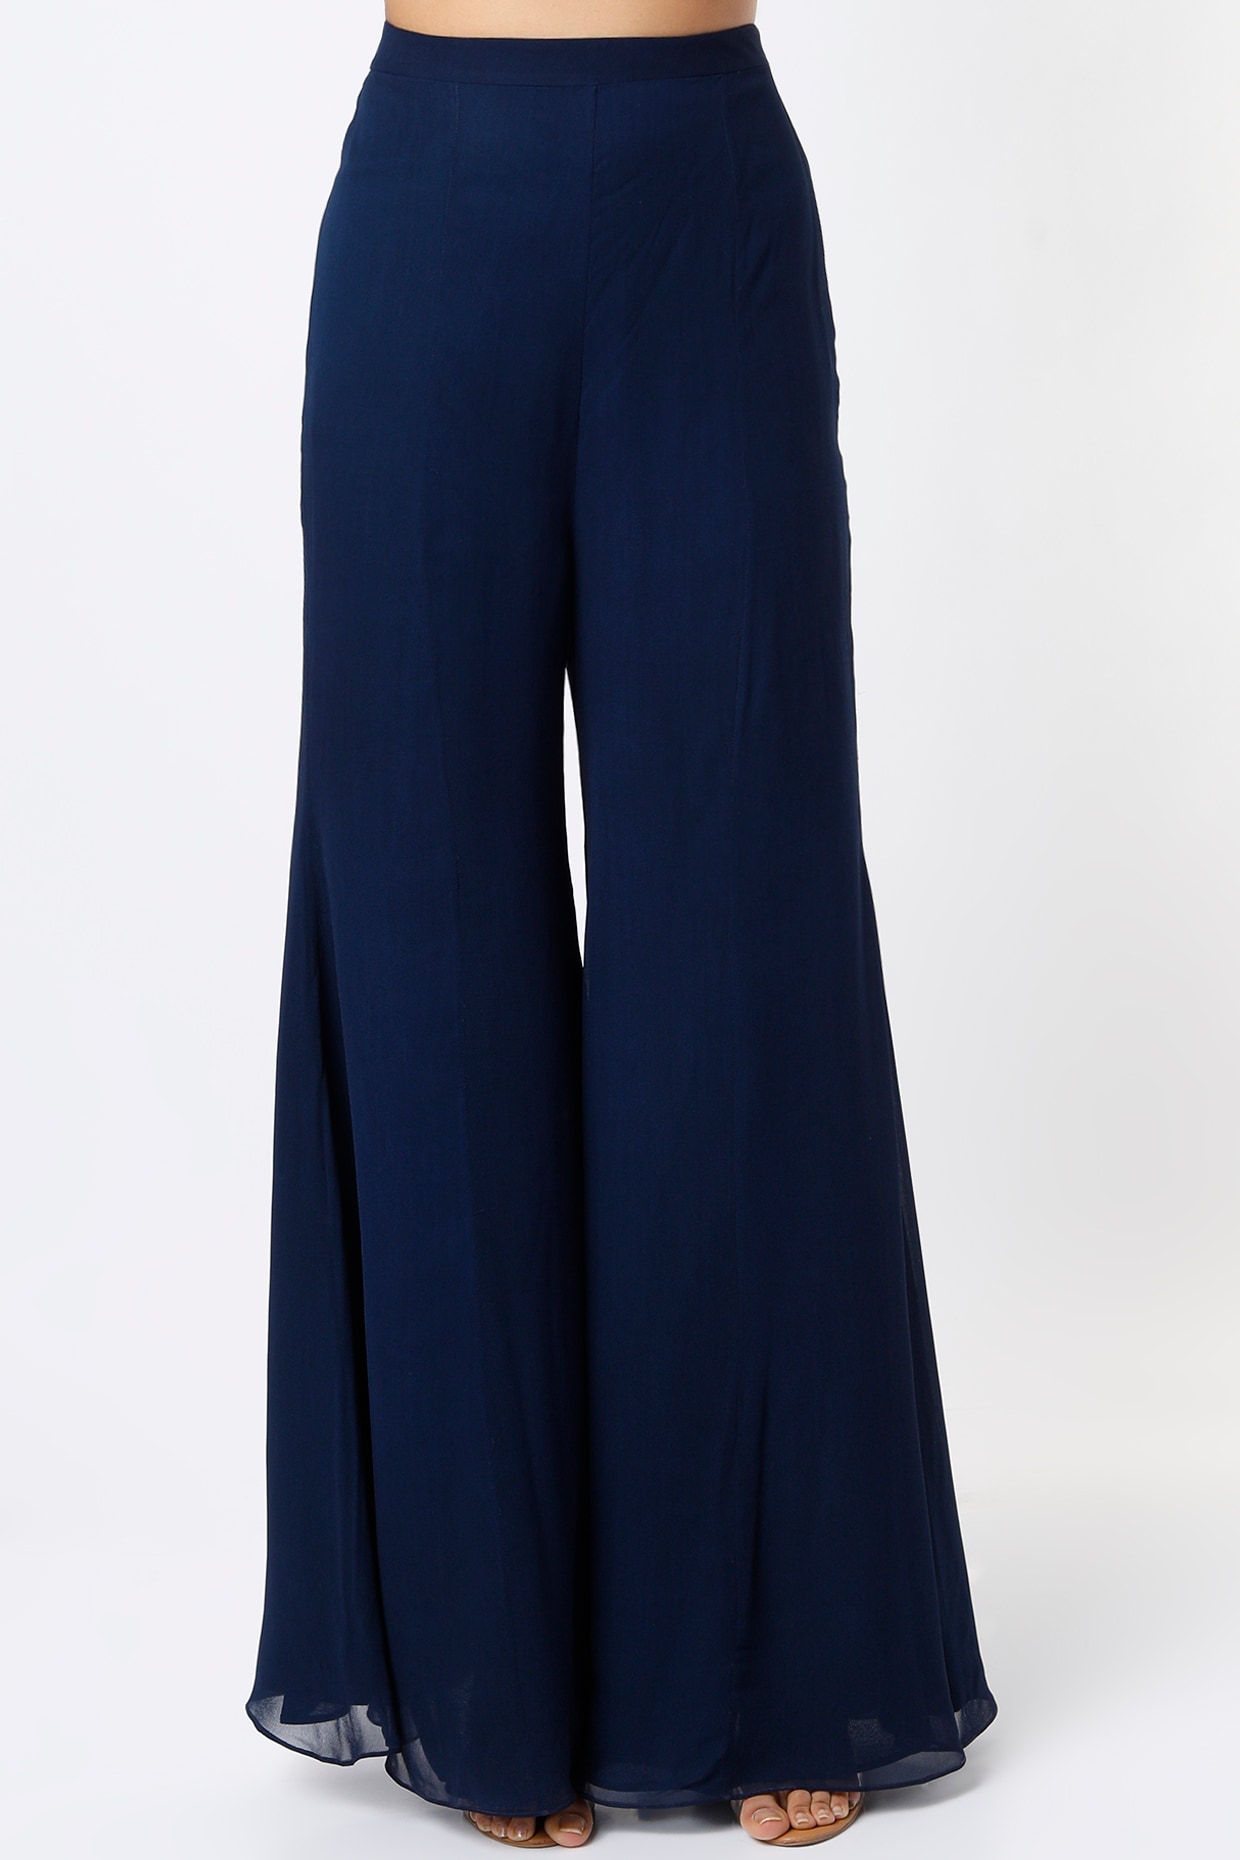 Buy Navy Blue Palazzo Pants for Women online at Netreyam